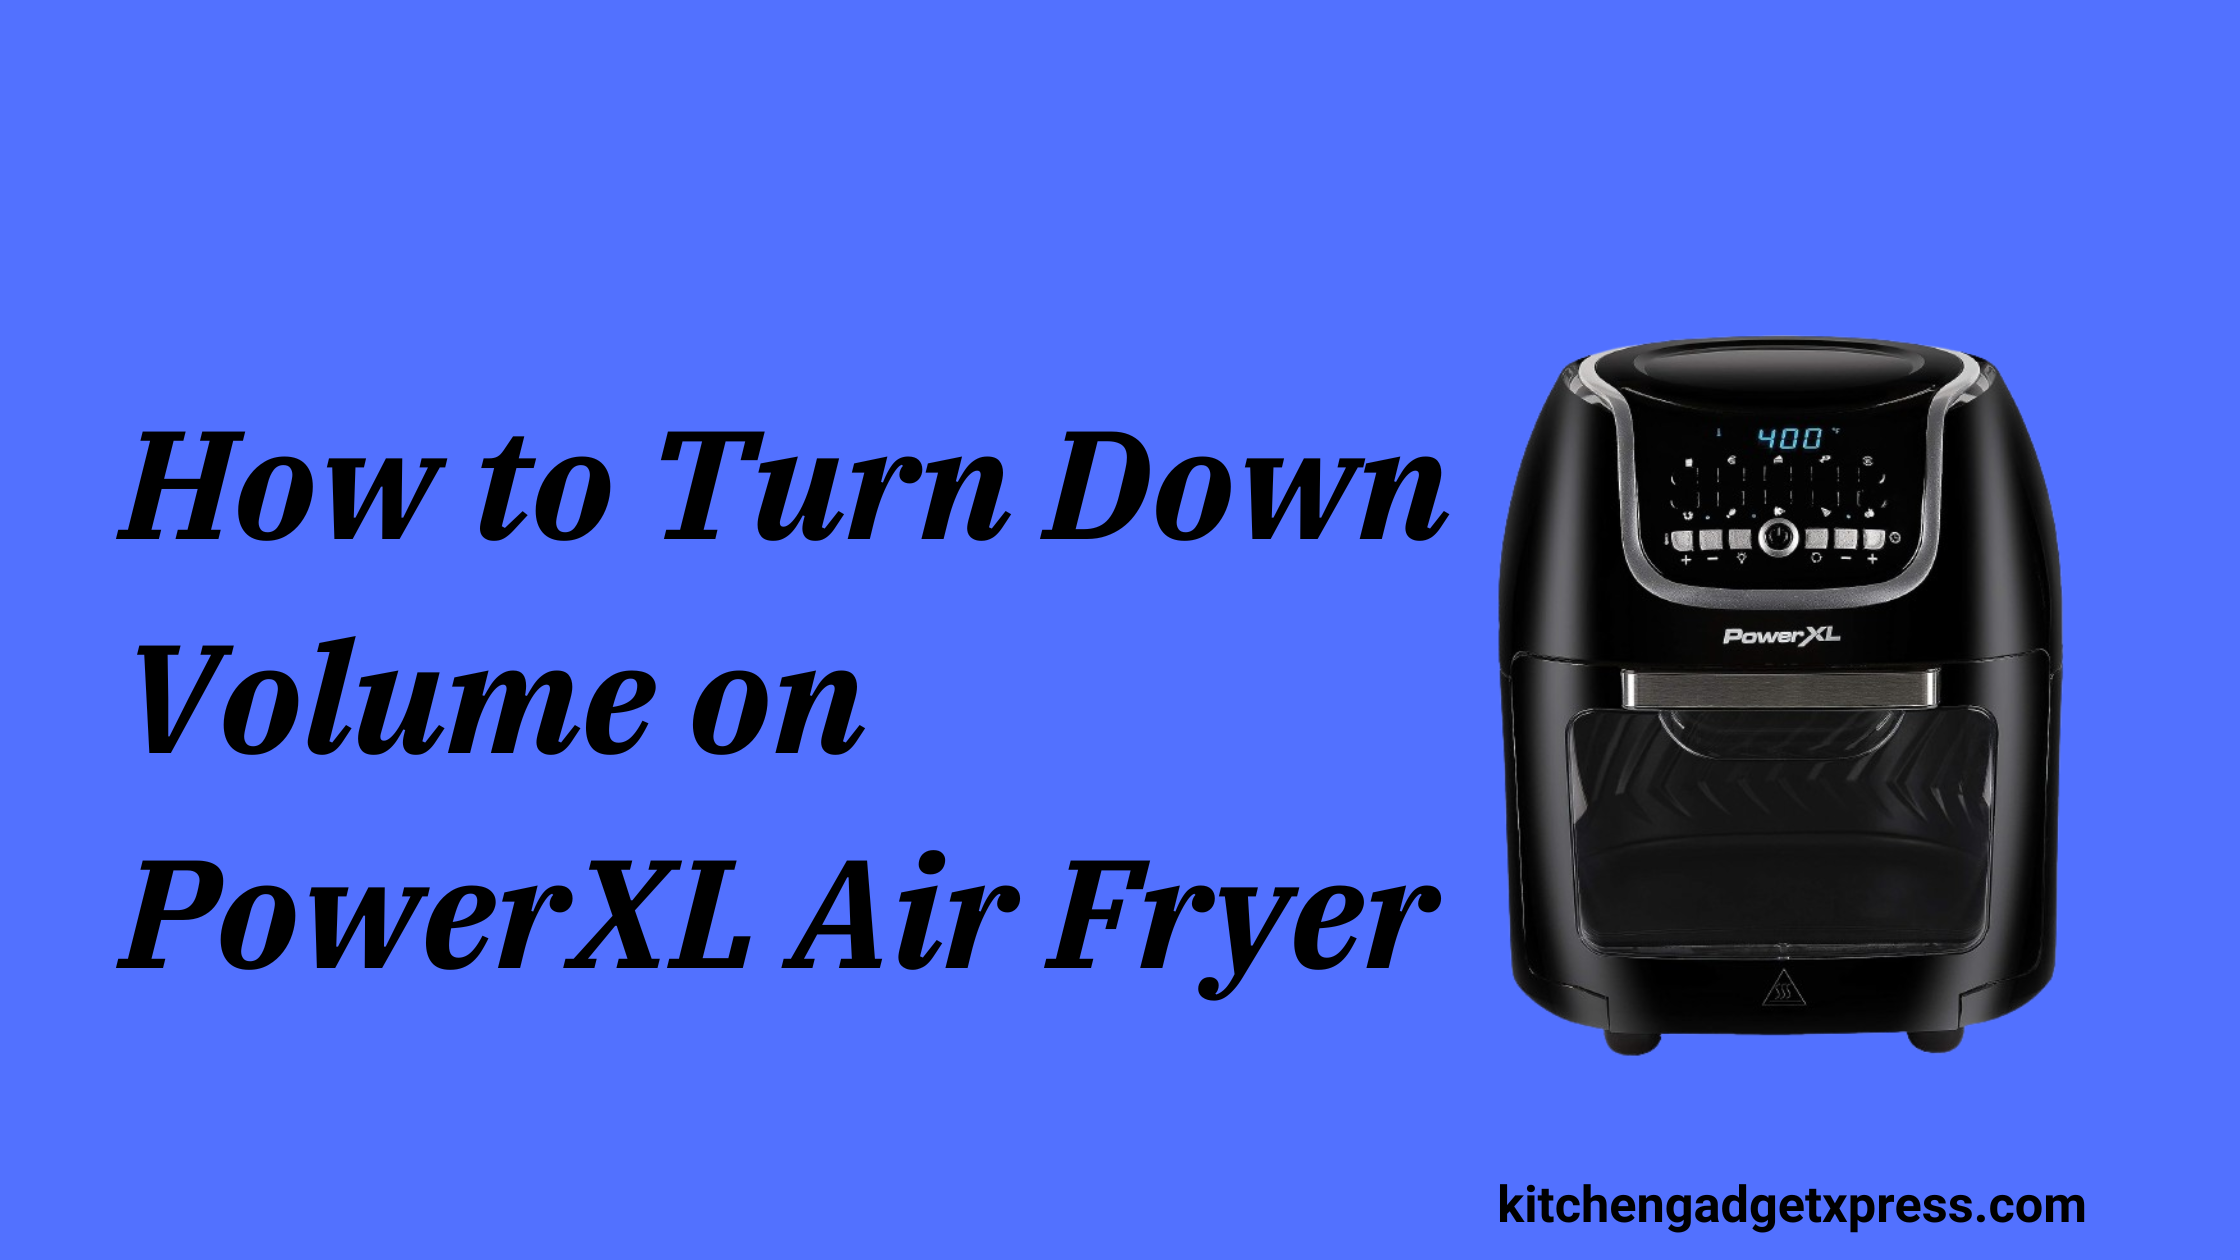 How to Turn Down Volume on PowerXL Air Fryer